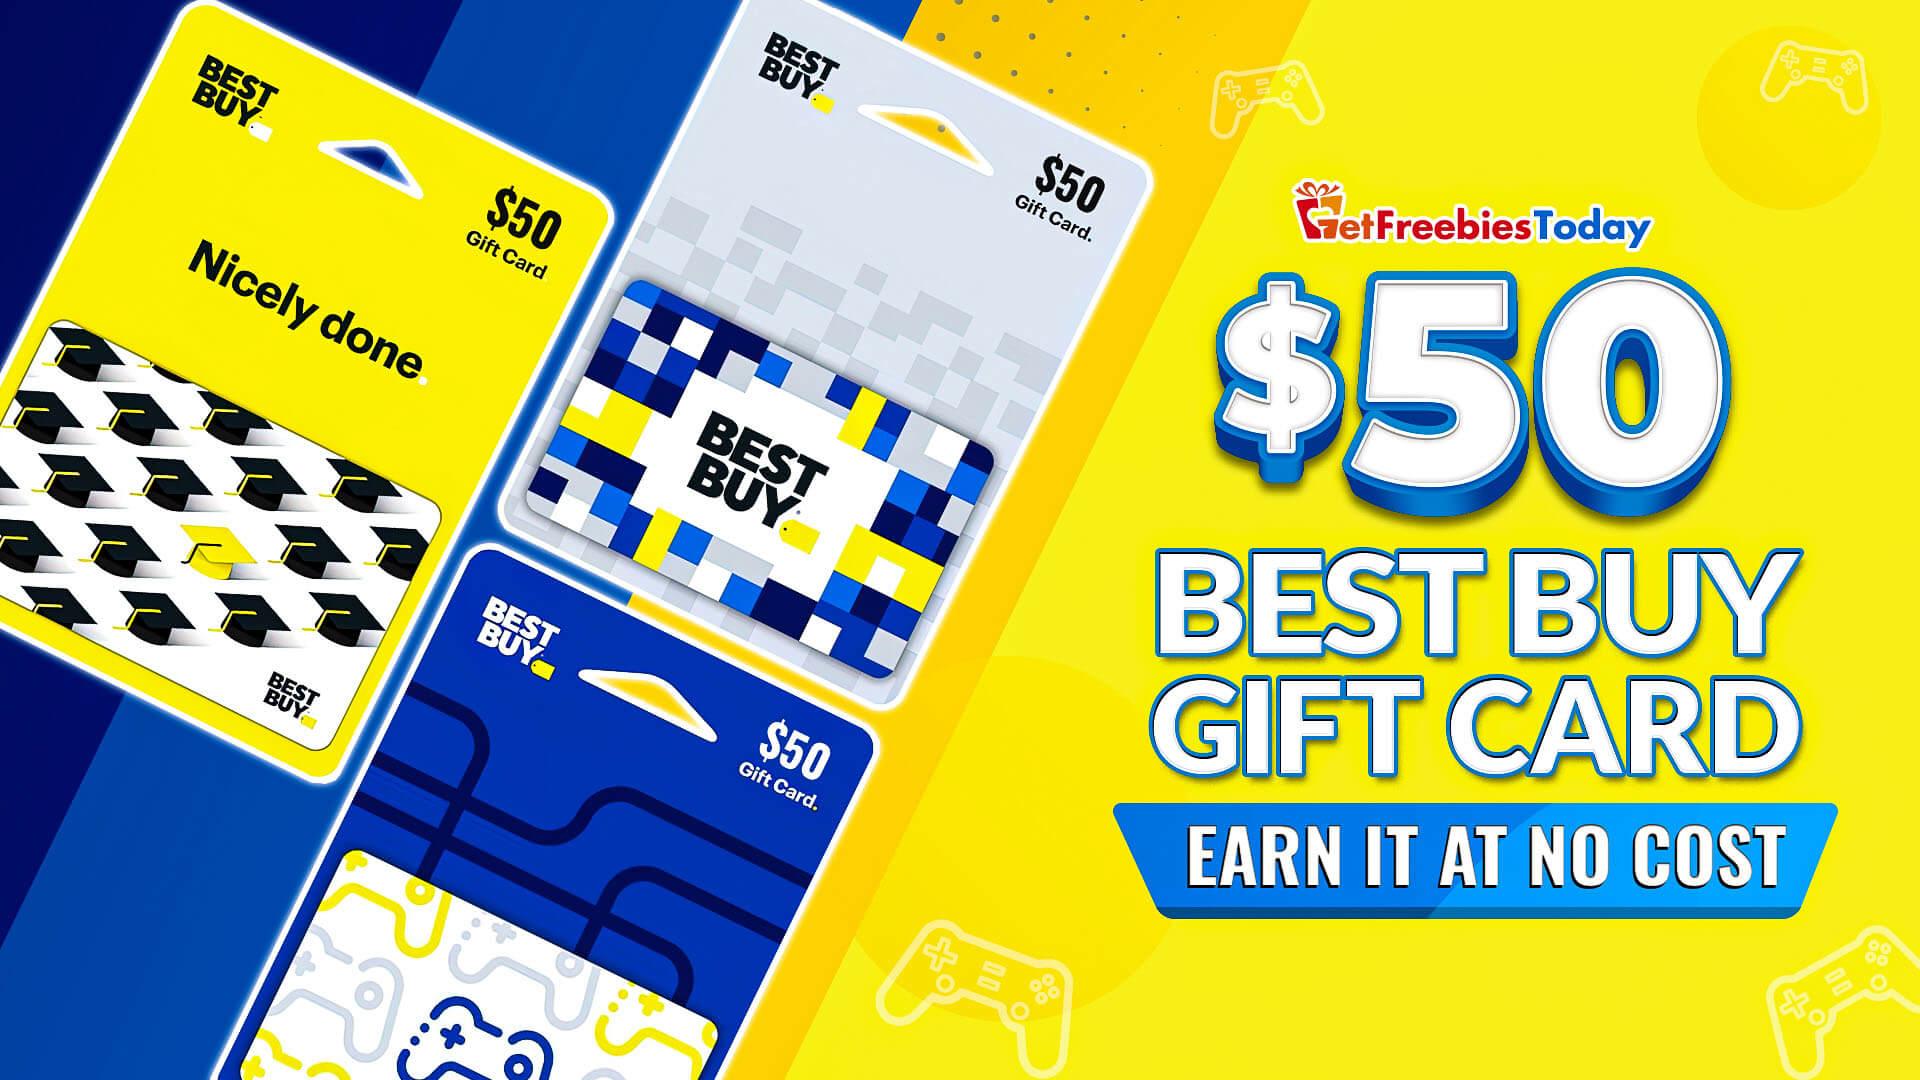 Obtain $50 Best Buy Gift Card Rapidly